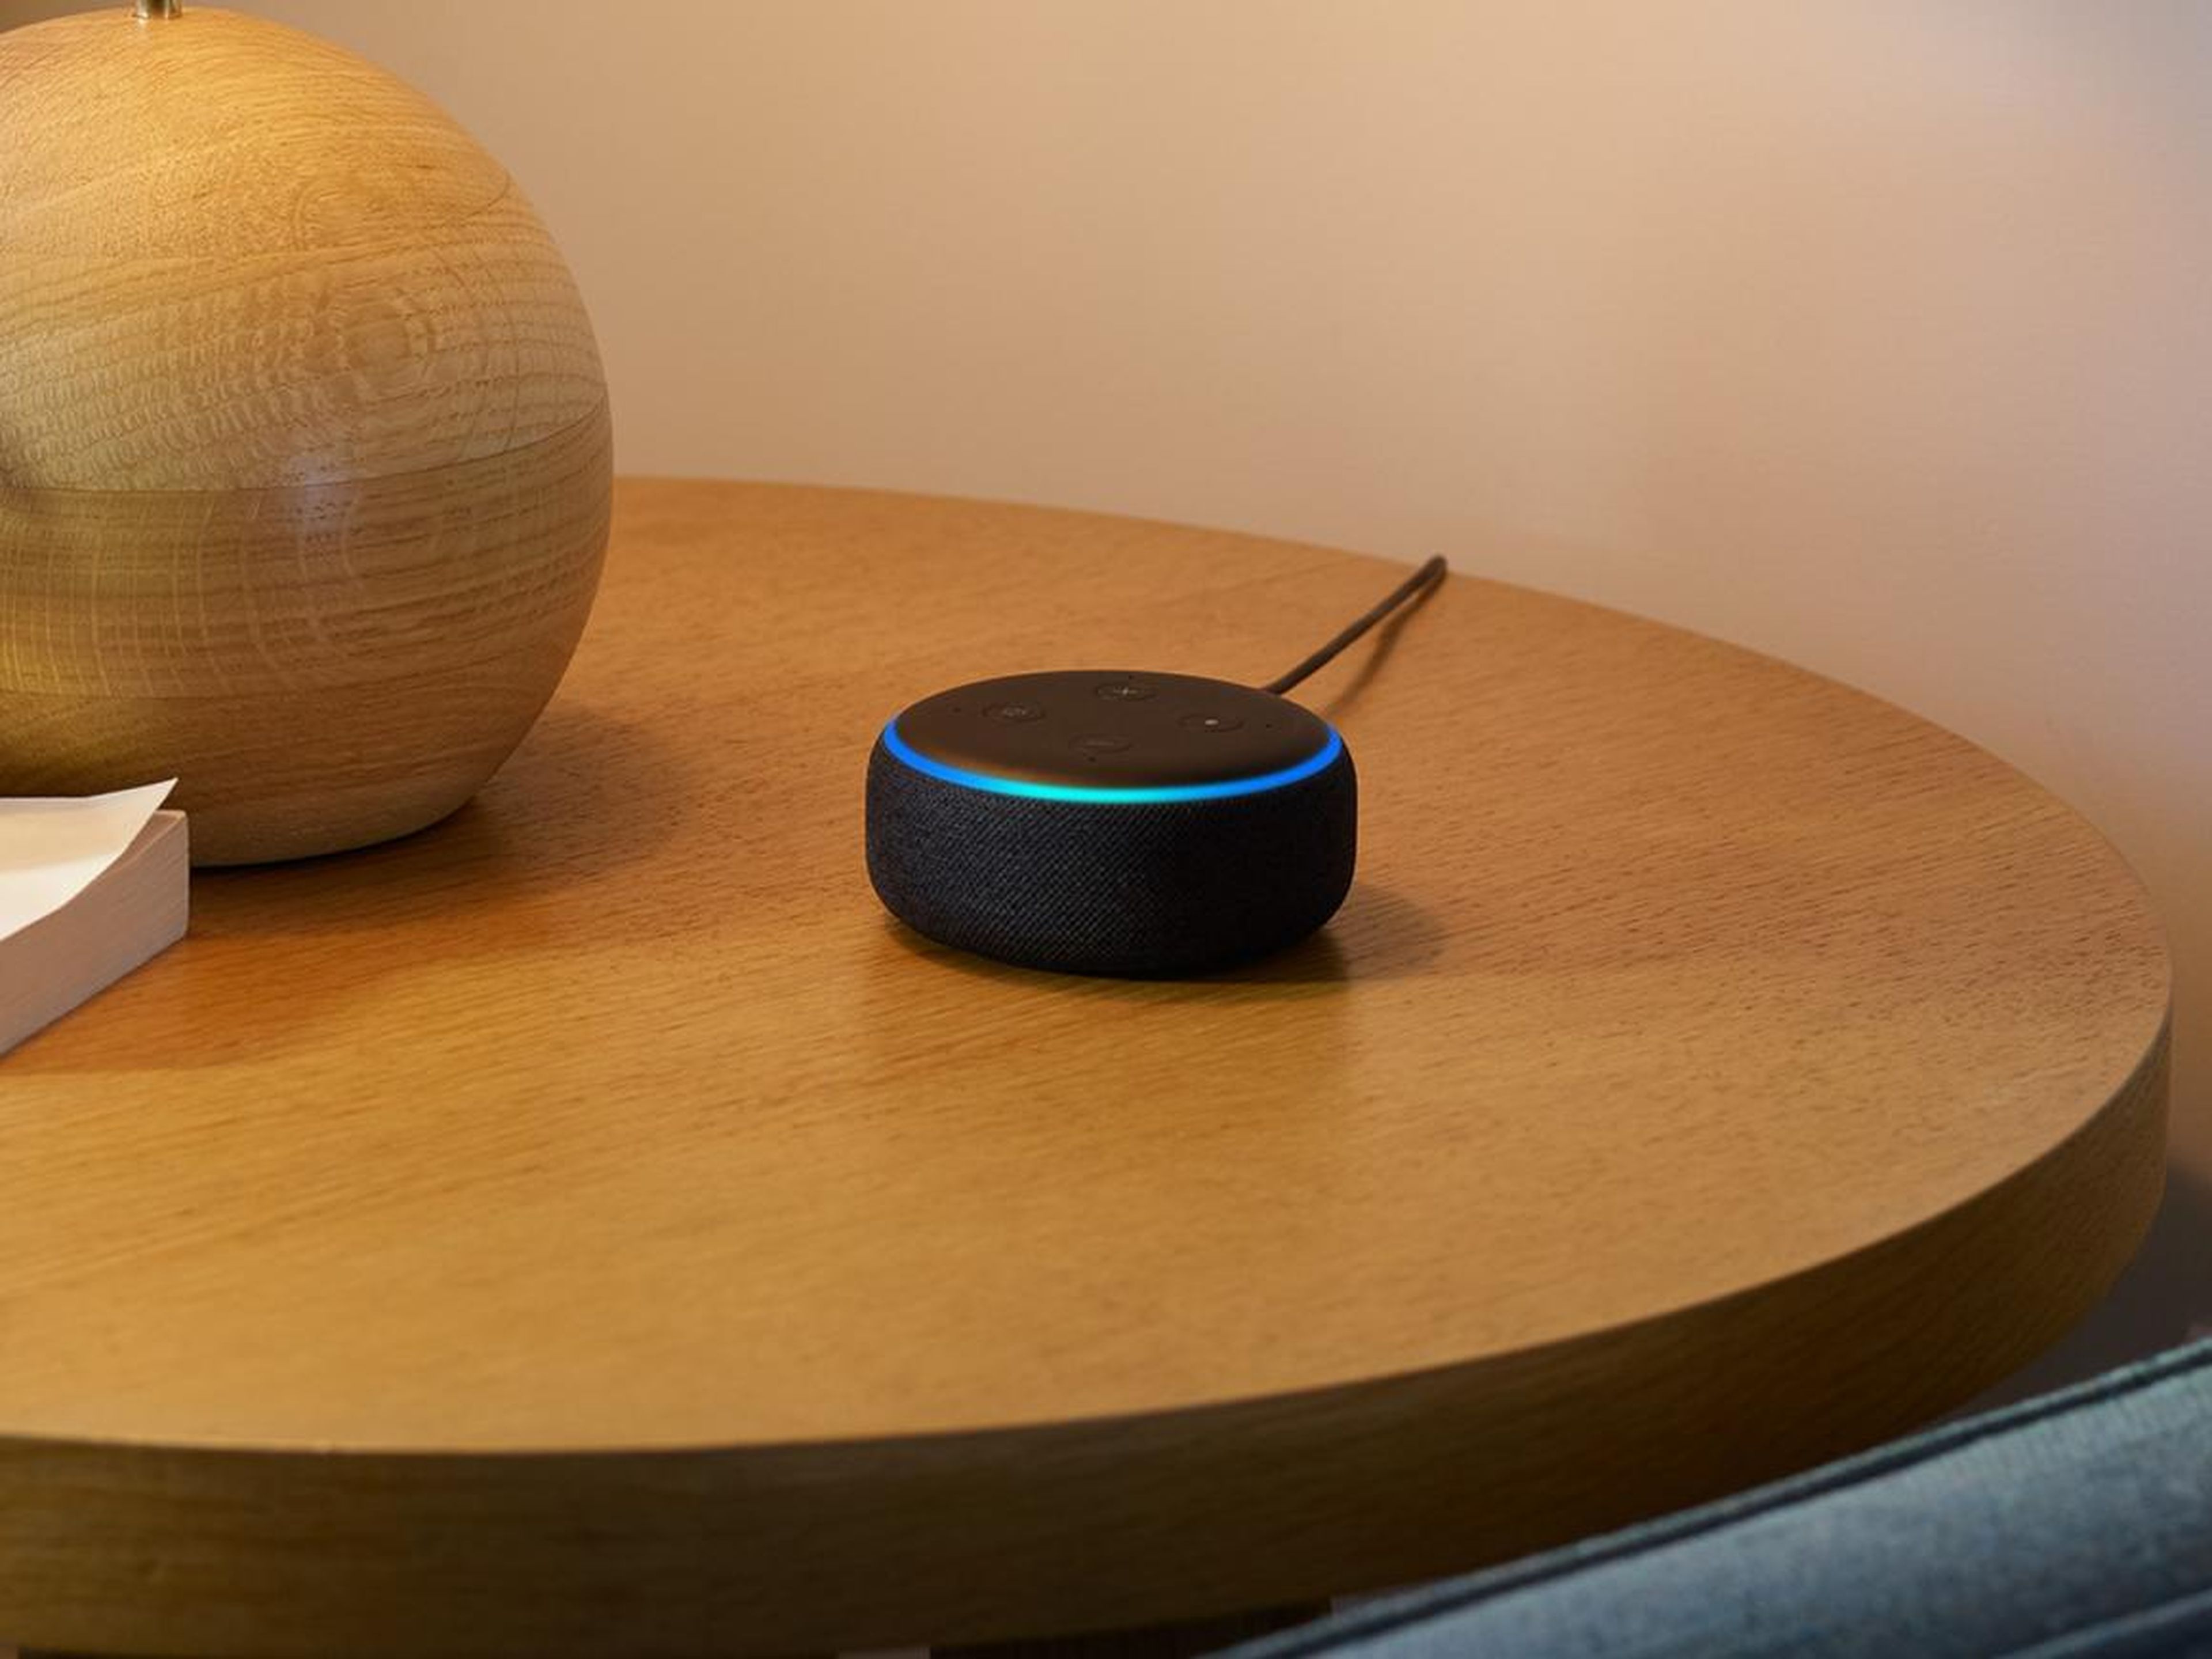 An Amazon Echo Dot for hands-free calls, alarms, music, updates on the weather, recipes, and more